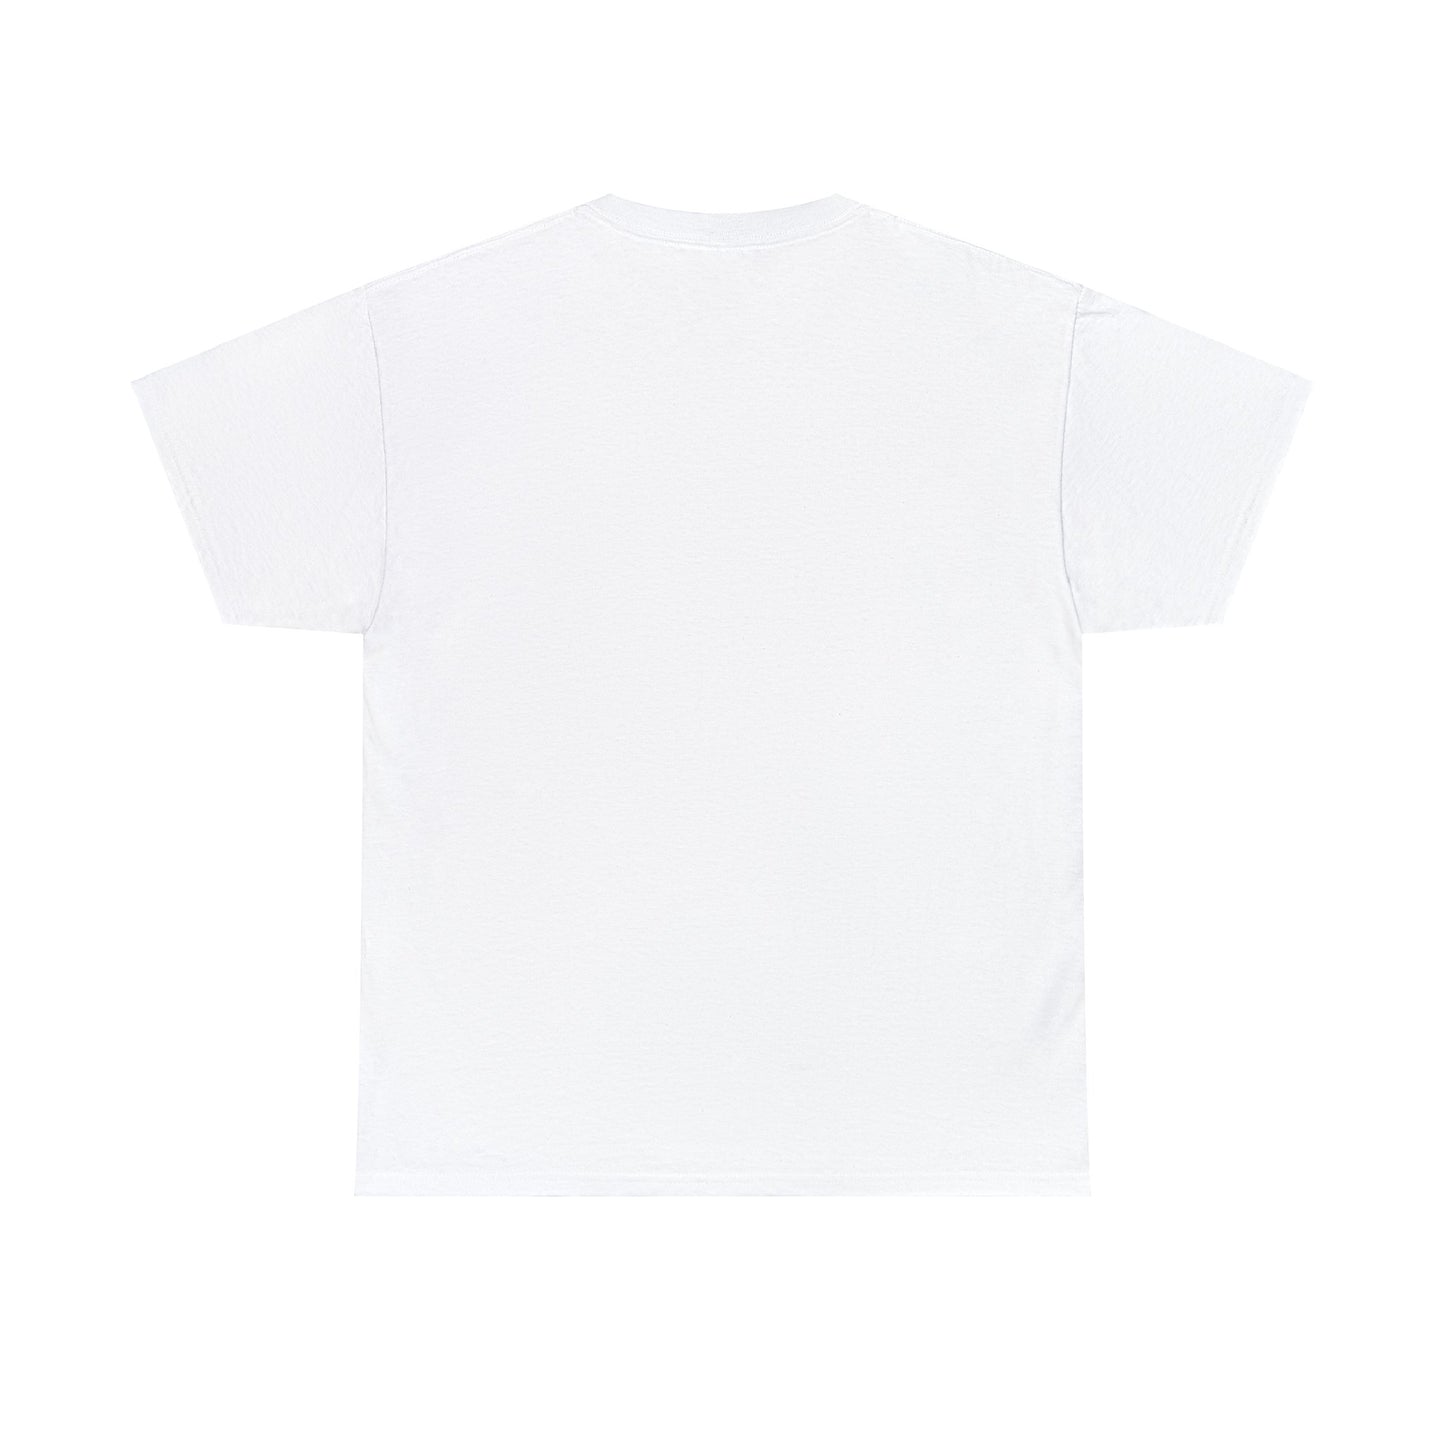 I SURVIVED MY FIRST WINTER - WHITE T-SHIRT